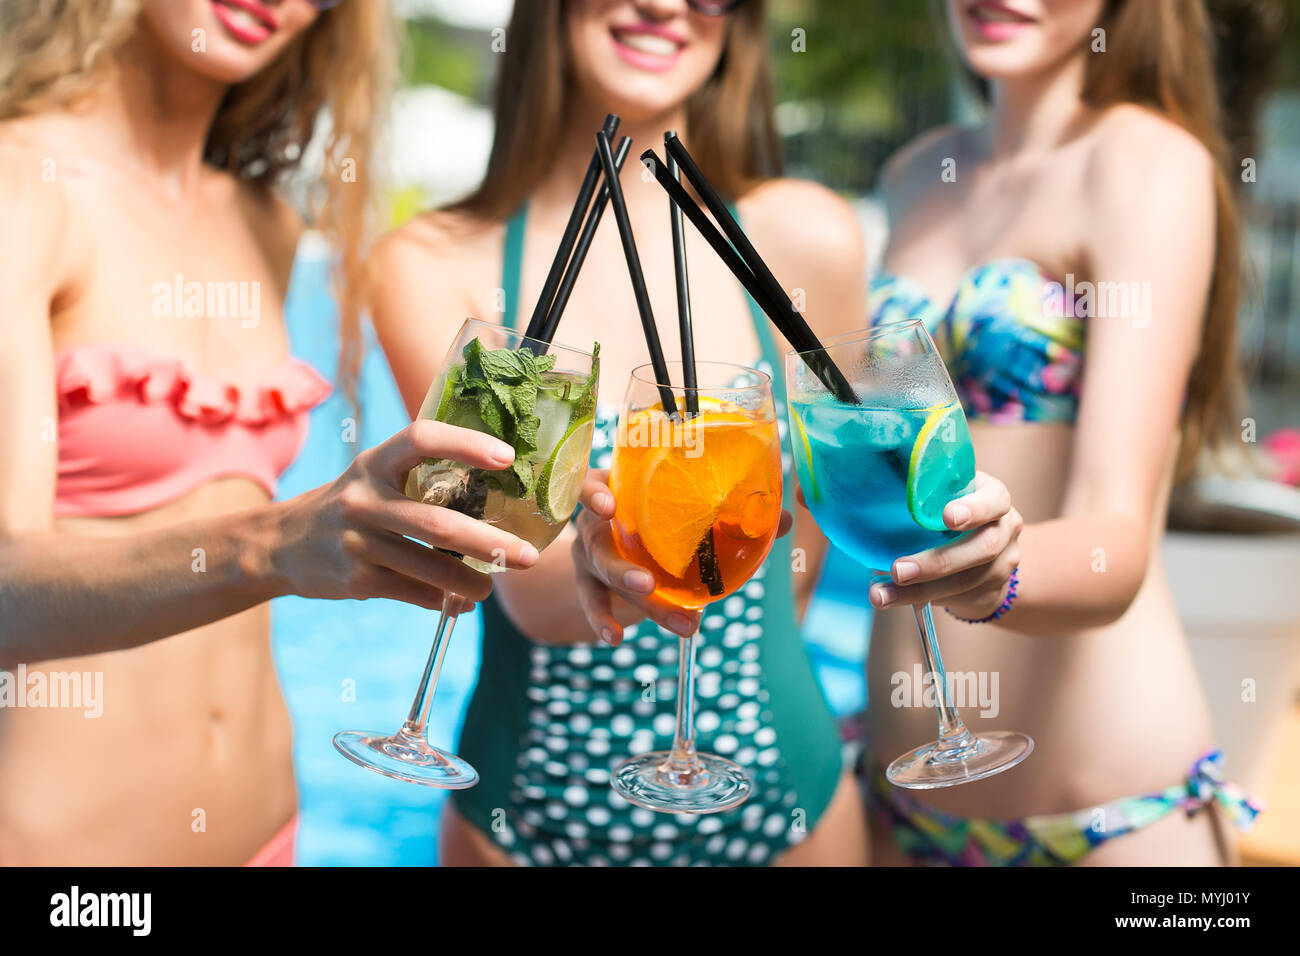 leisure time, party, celebration concept. close up of three tall glasses with different cocktails of green, orange and bright blue coloures, three young girls are holding them standing by the pool Stock Photo